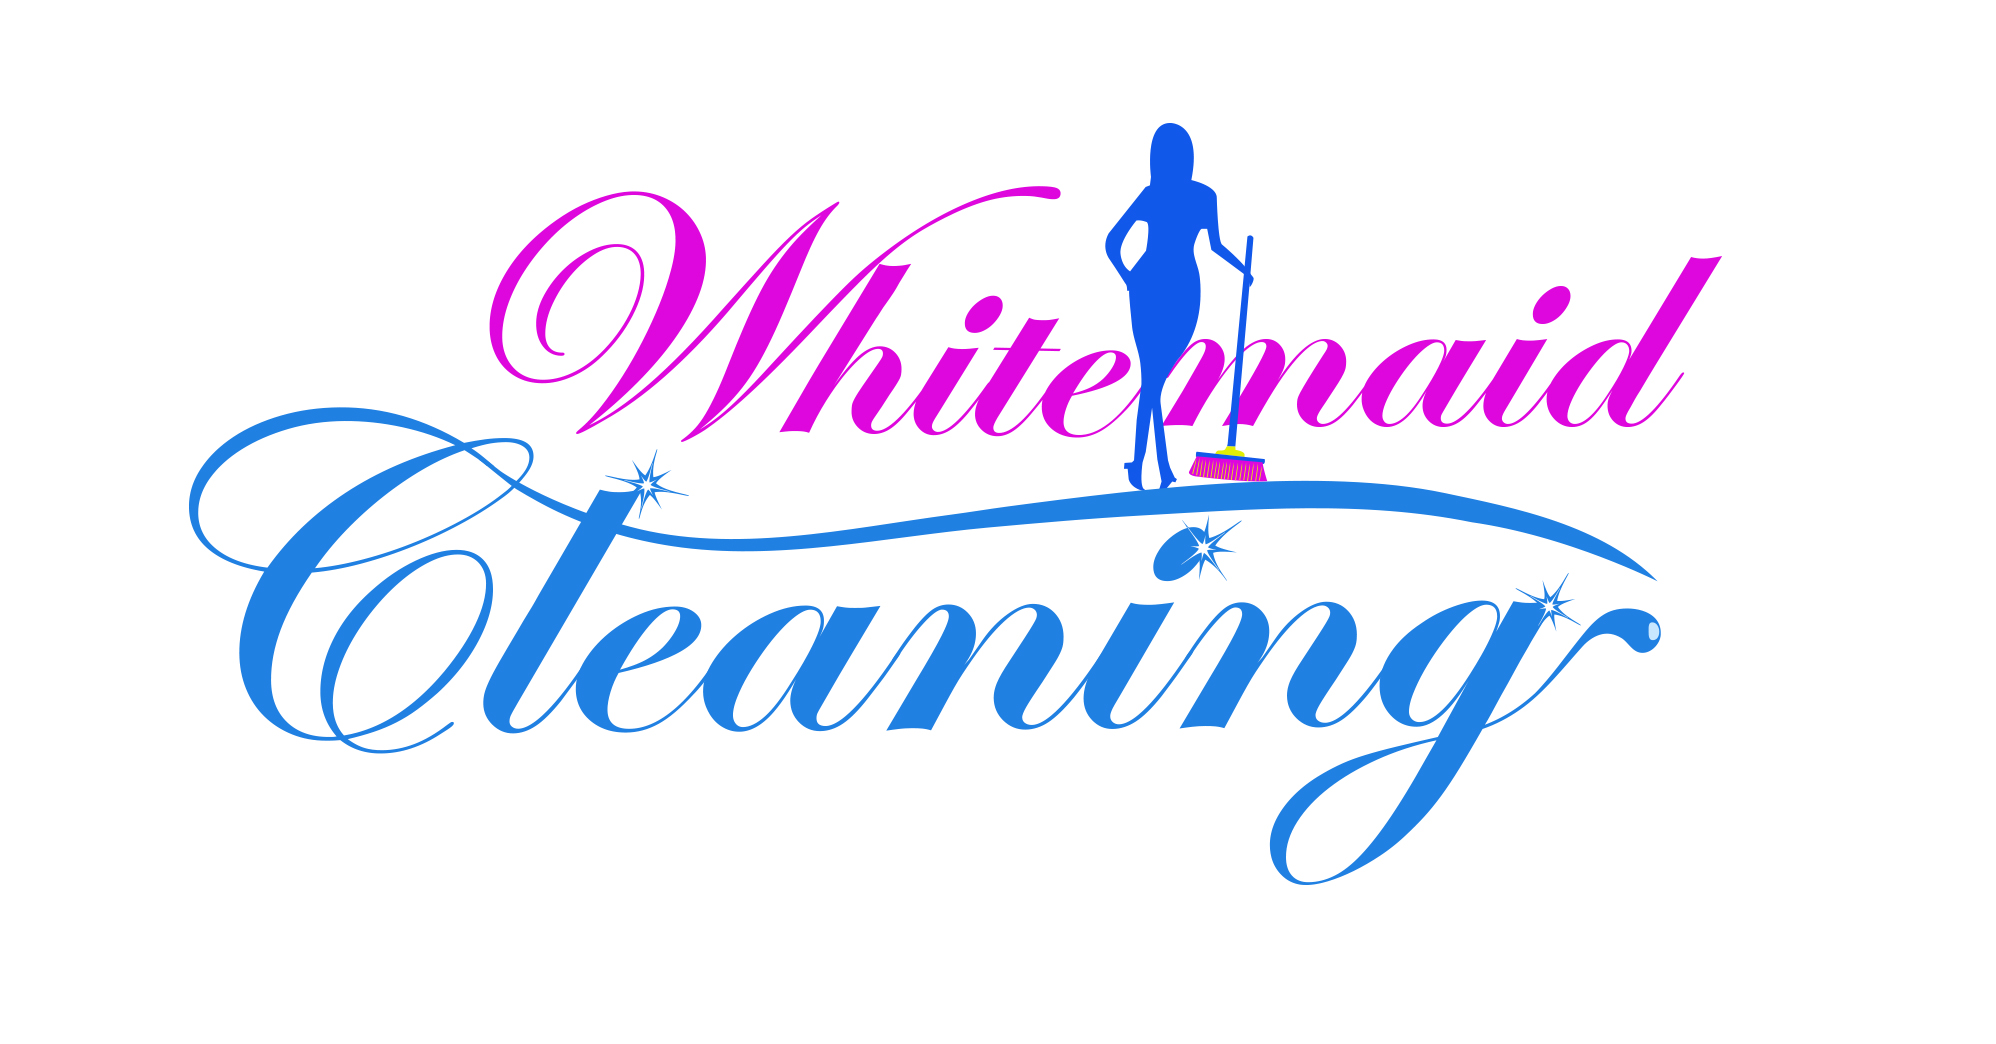 Whitemaid Cleaning Services LLC